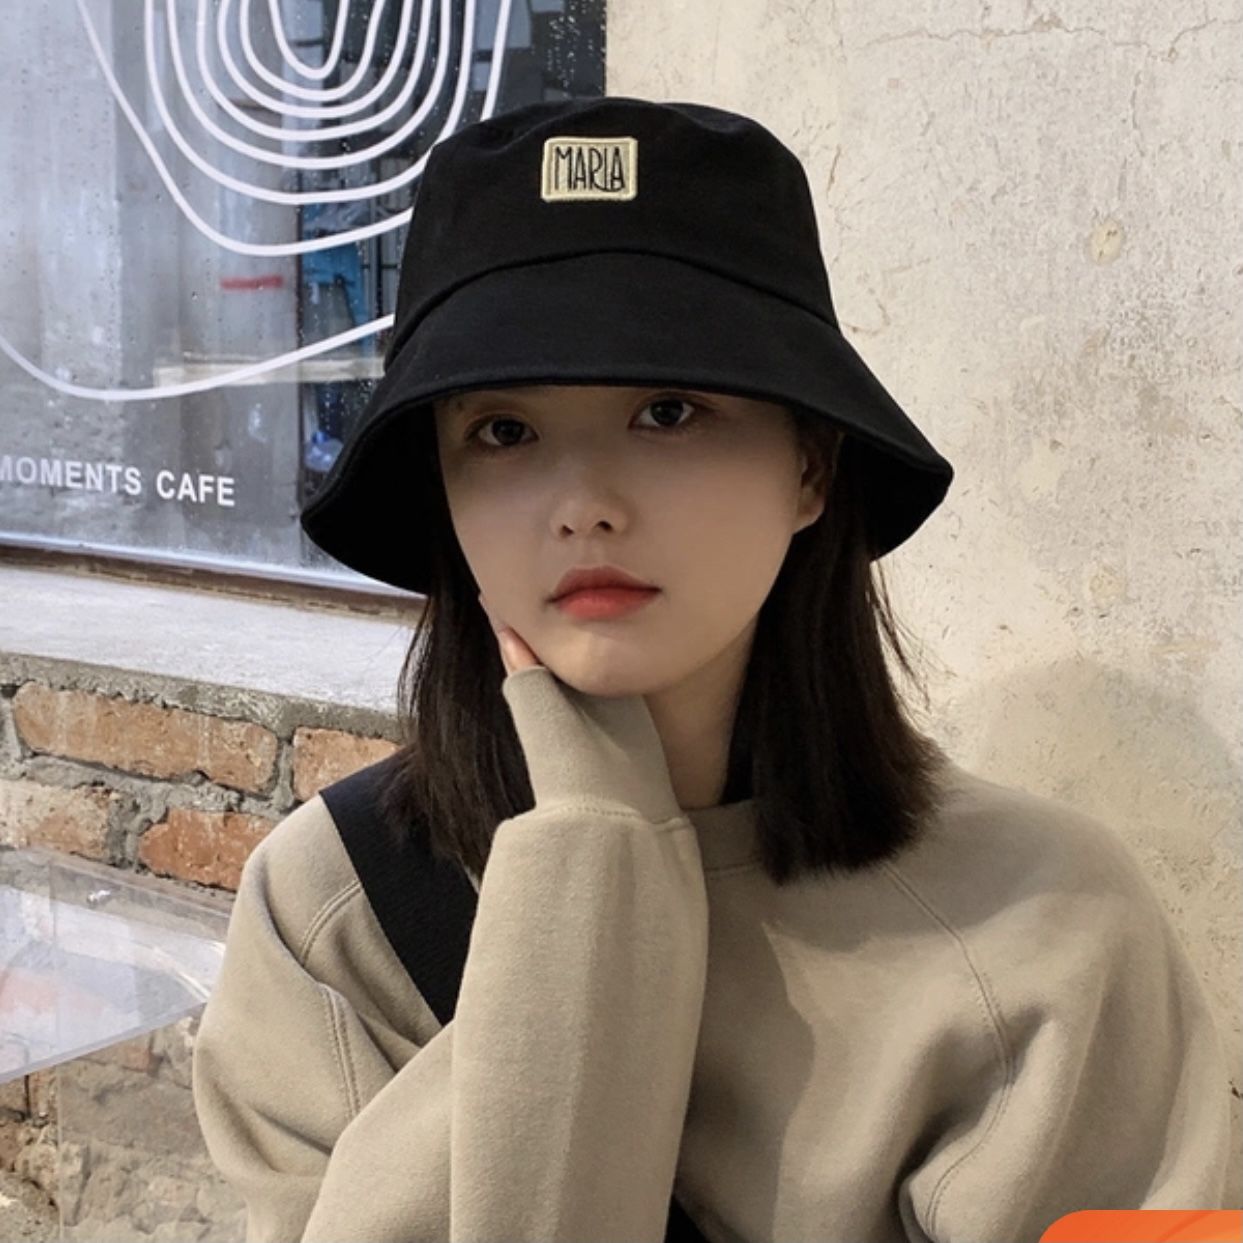 Hat women's new all-match student Korean version of the net red fisherman hat Japanese trend couple fashion sunscreen sun hat summer